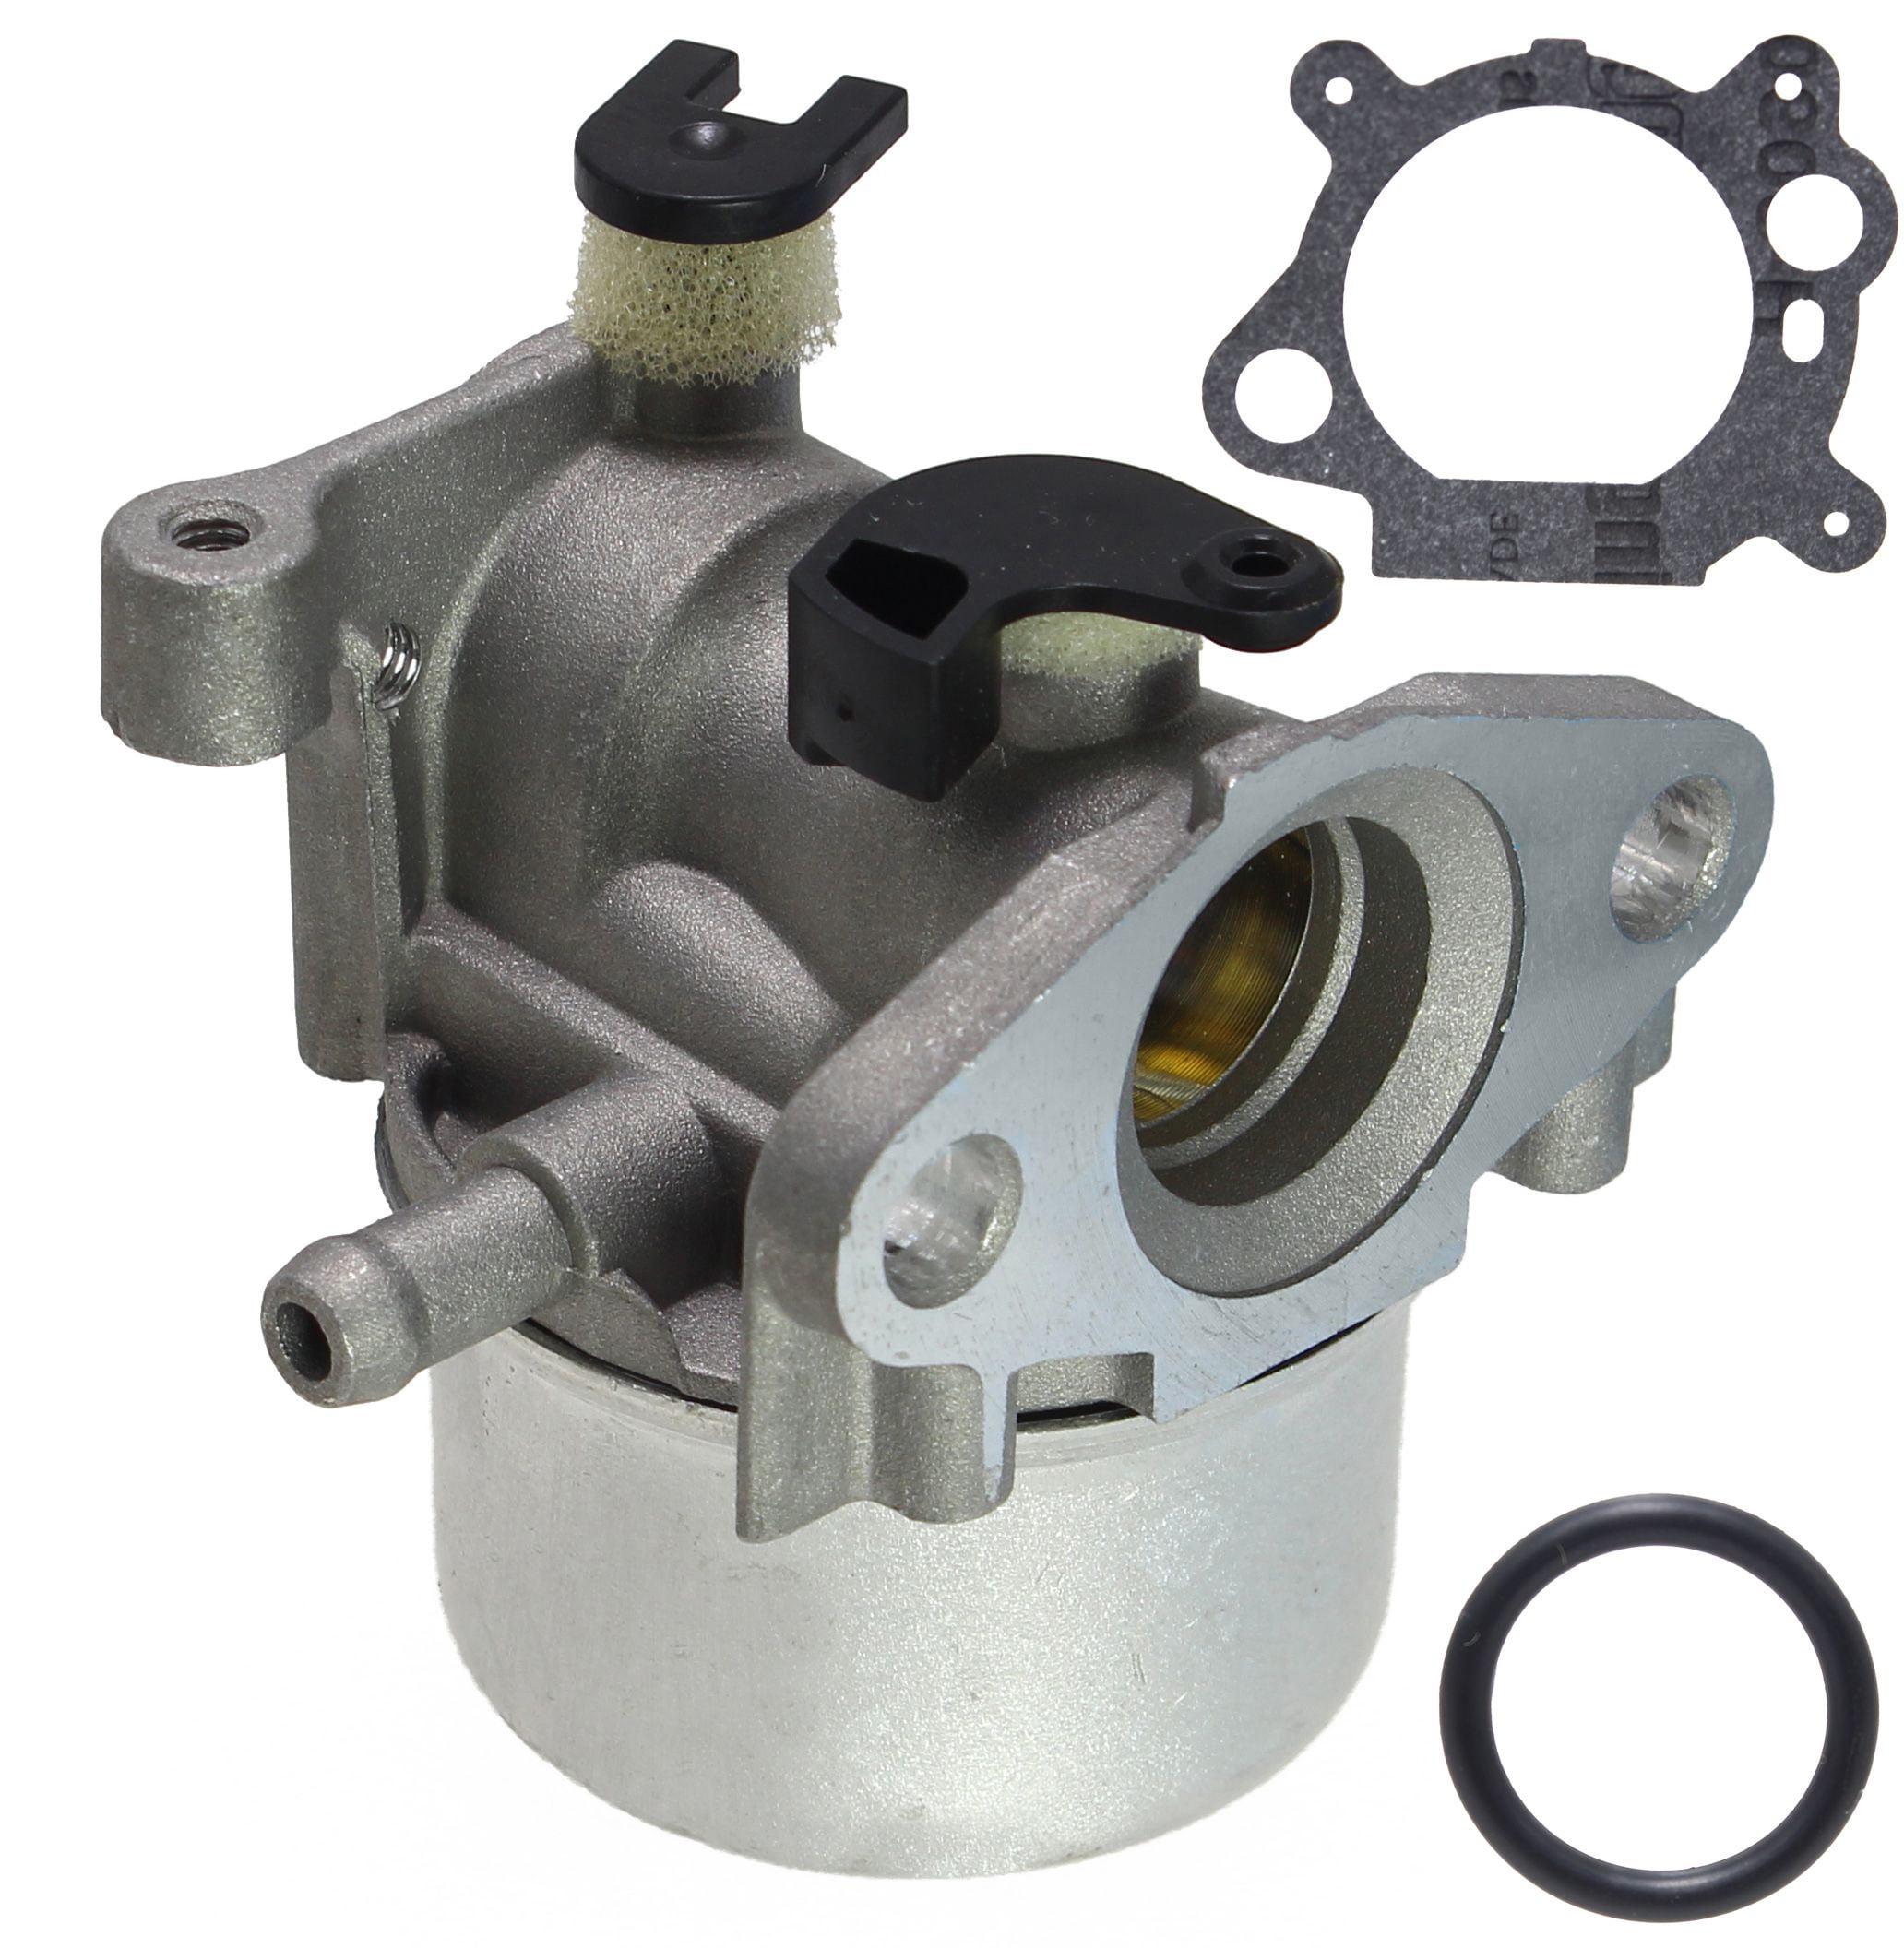 Carbpro 593261 Replacement for Briggs and Stratton 593261 Carburetor Lawn Mower 